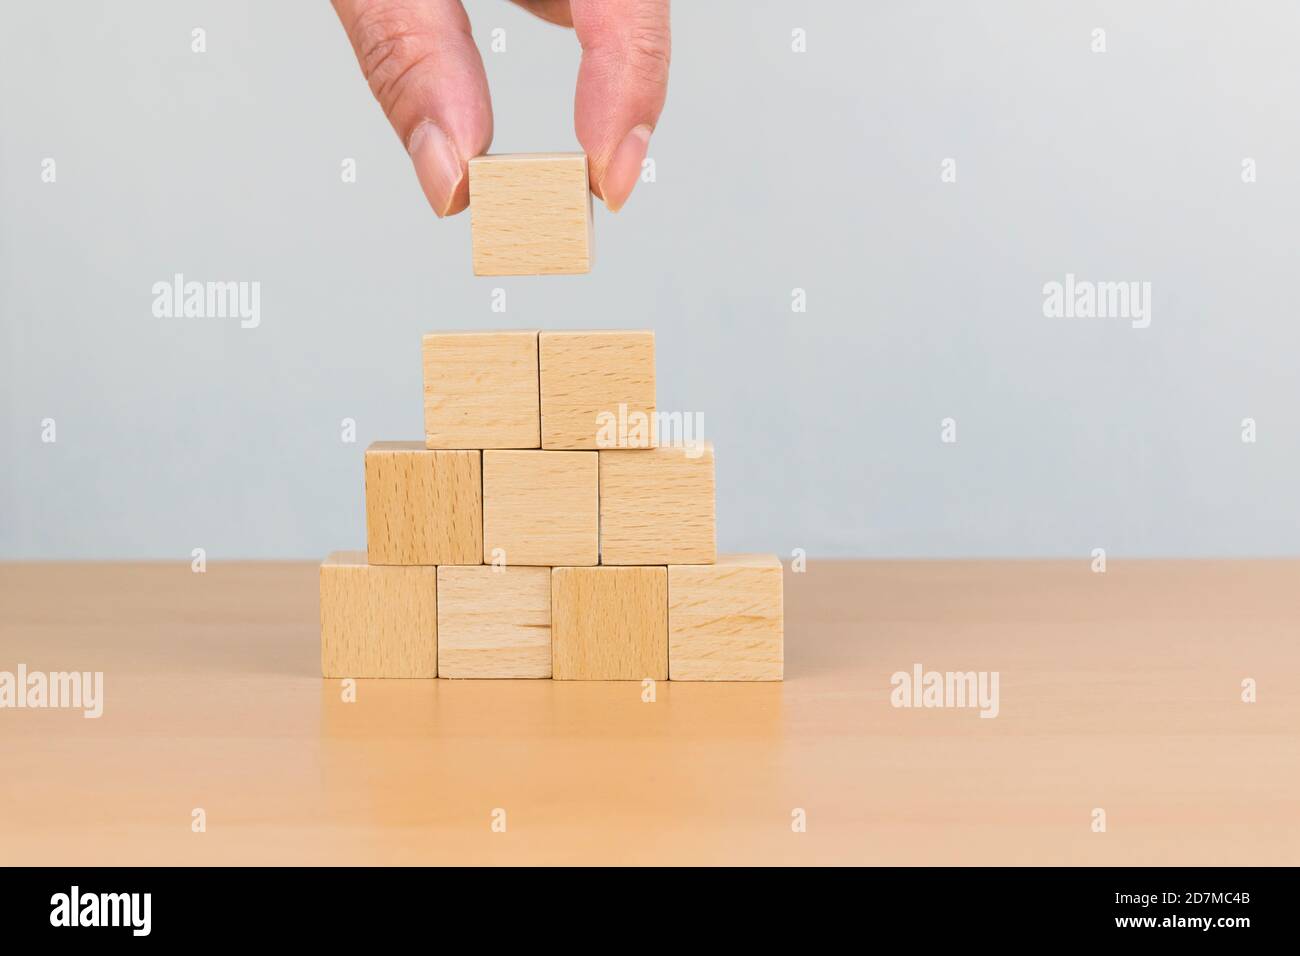 Hand arranging wood block stacking as step stair. Ladder career path concept for business growth success process Stock Photo